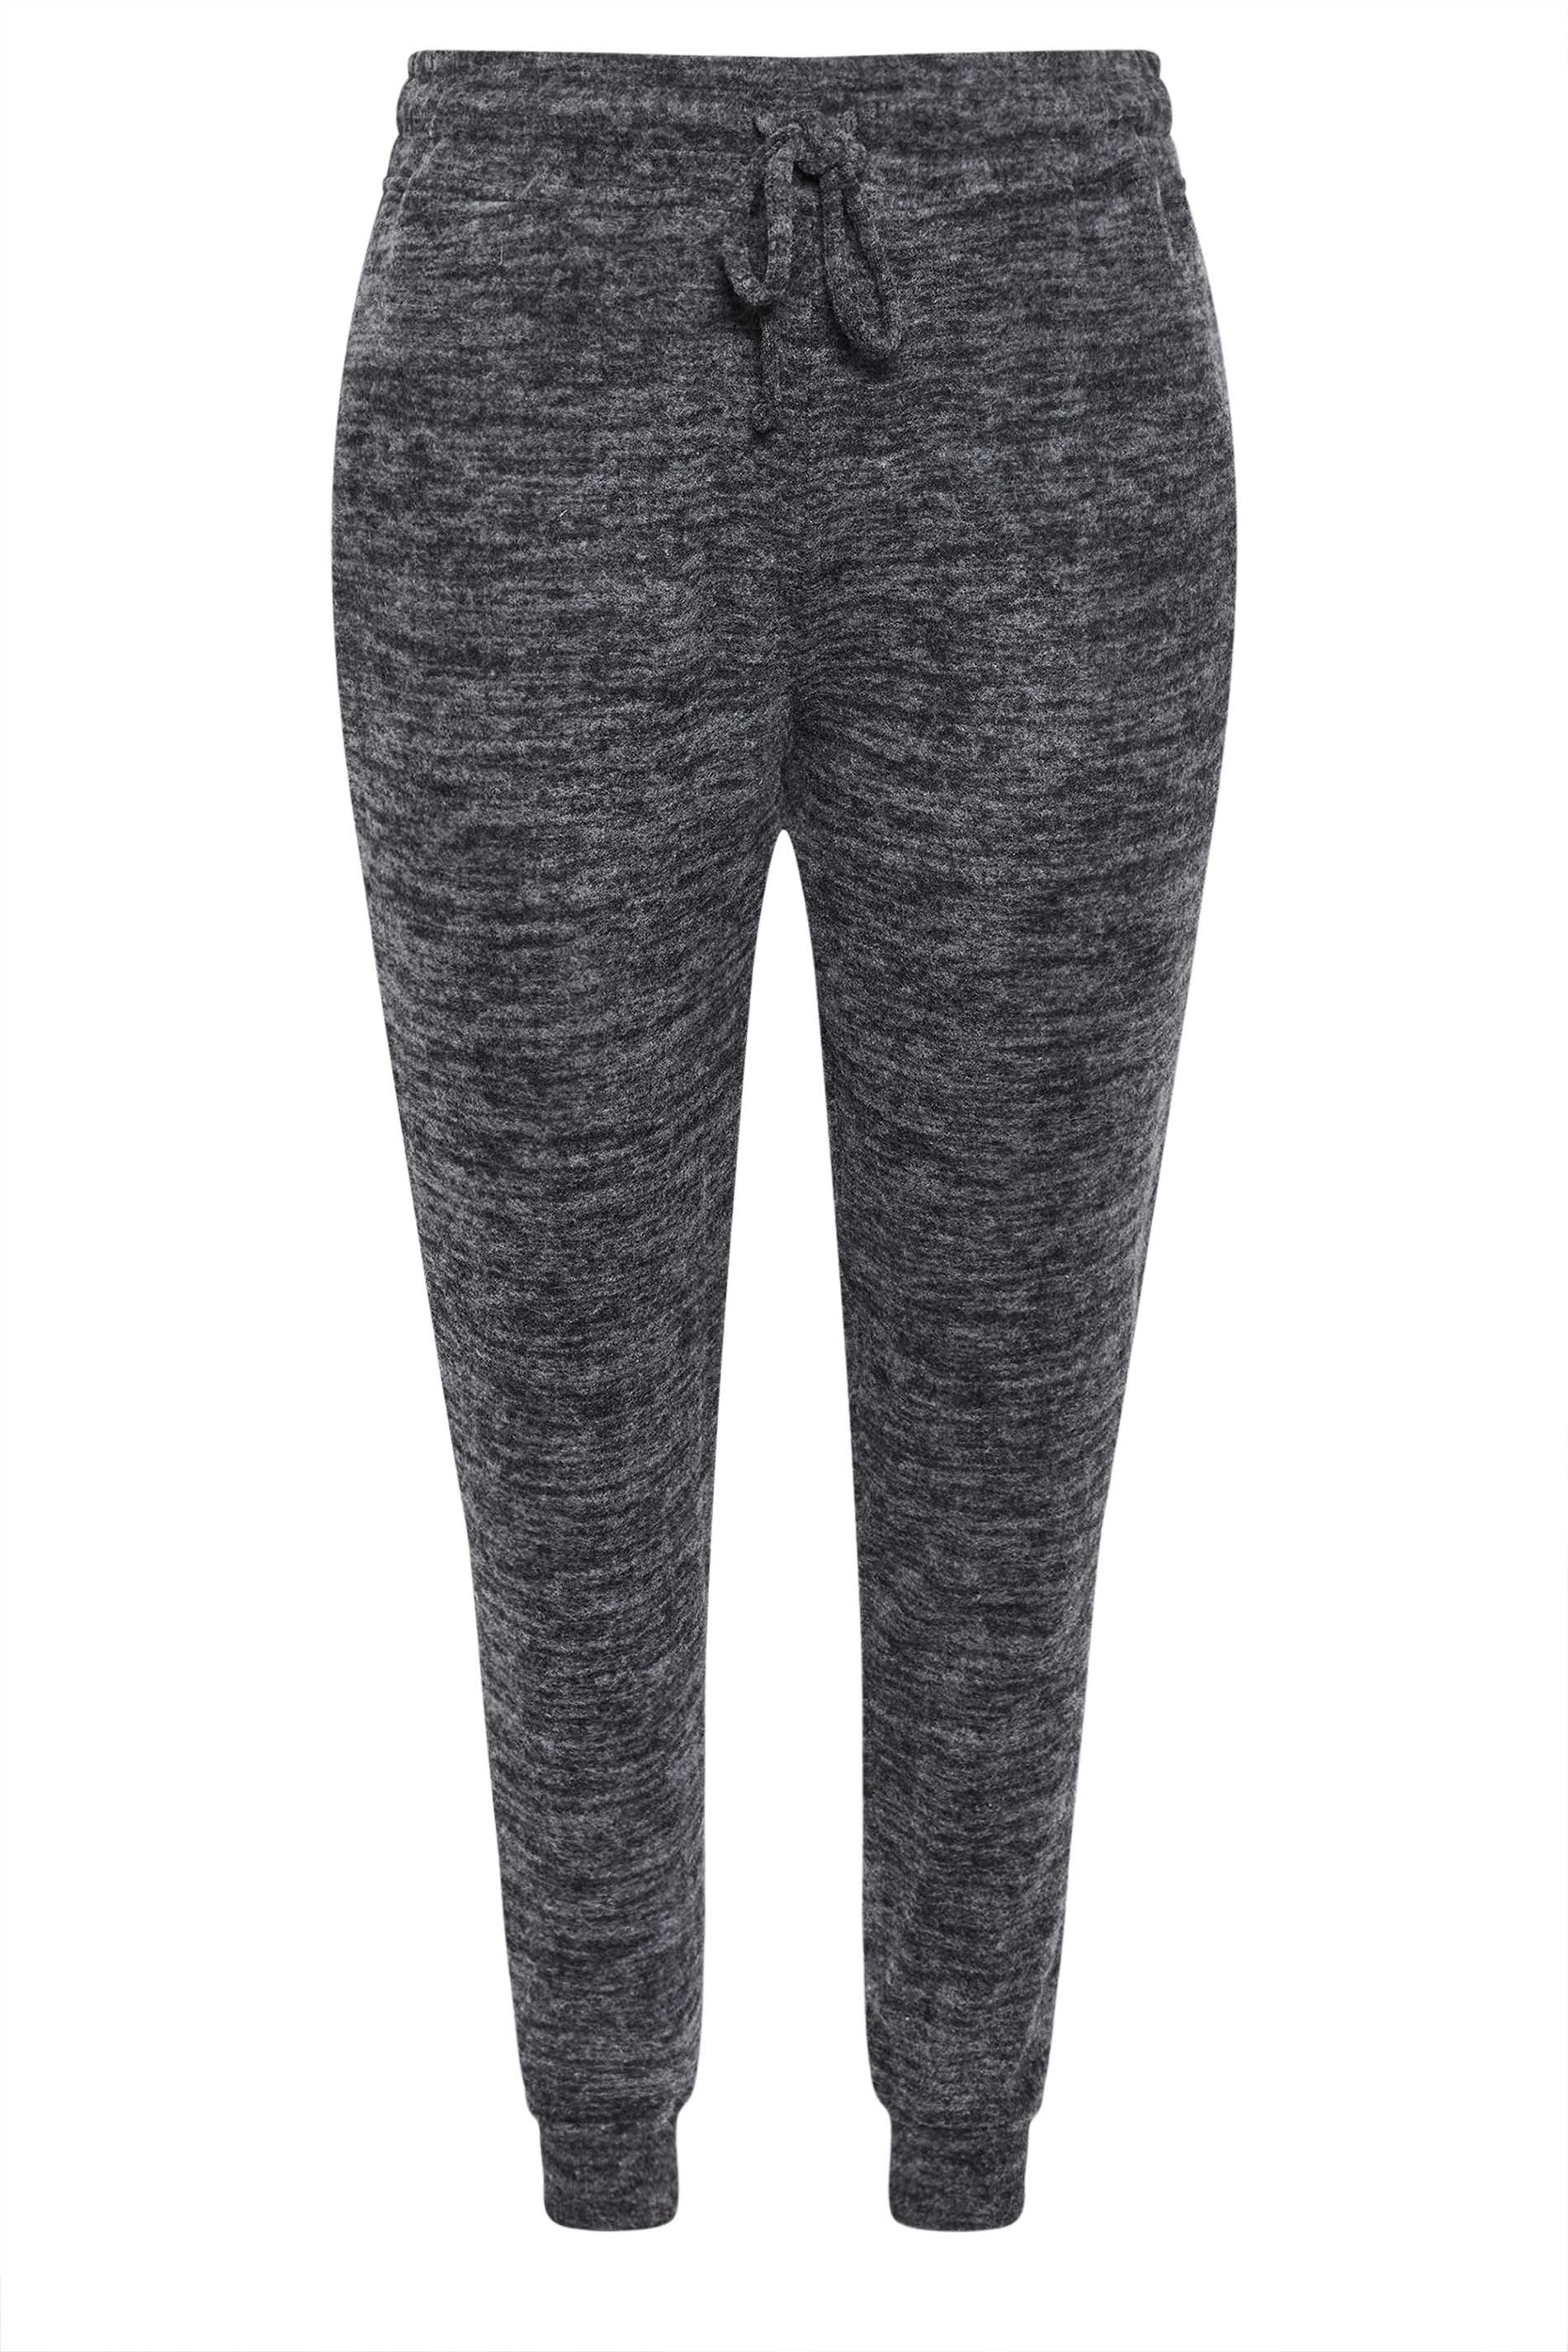 YOURS Plus Size Charcoal Grey Marl Soft Touch Cuffed Joggers